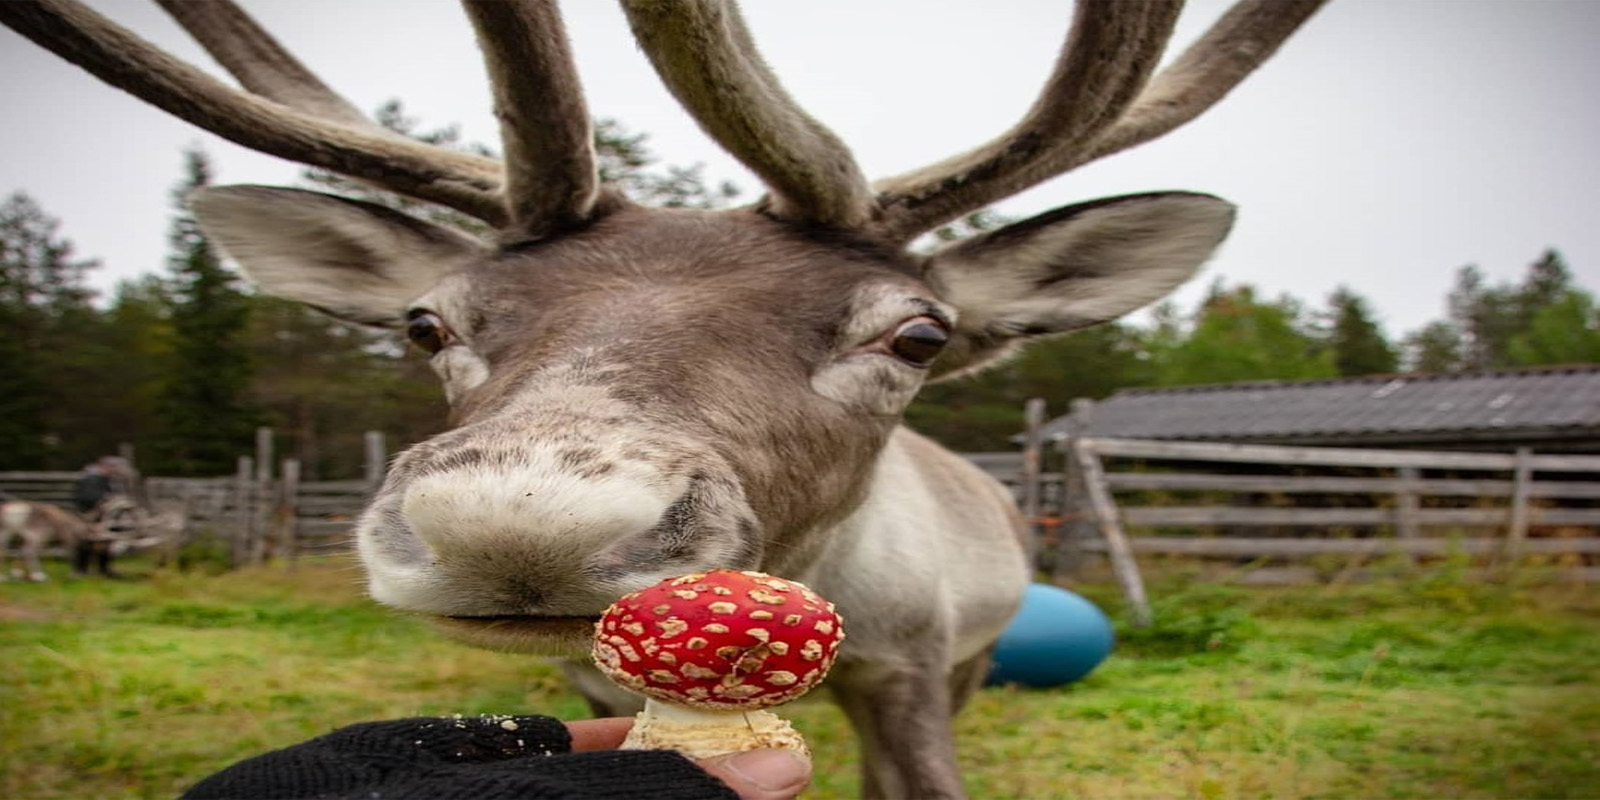 A reindeer with Amanita muscaria